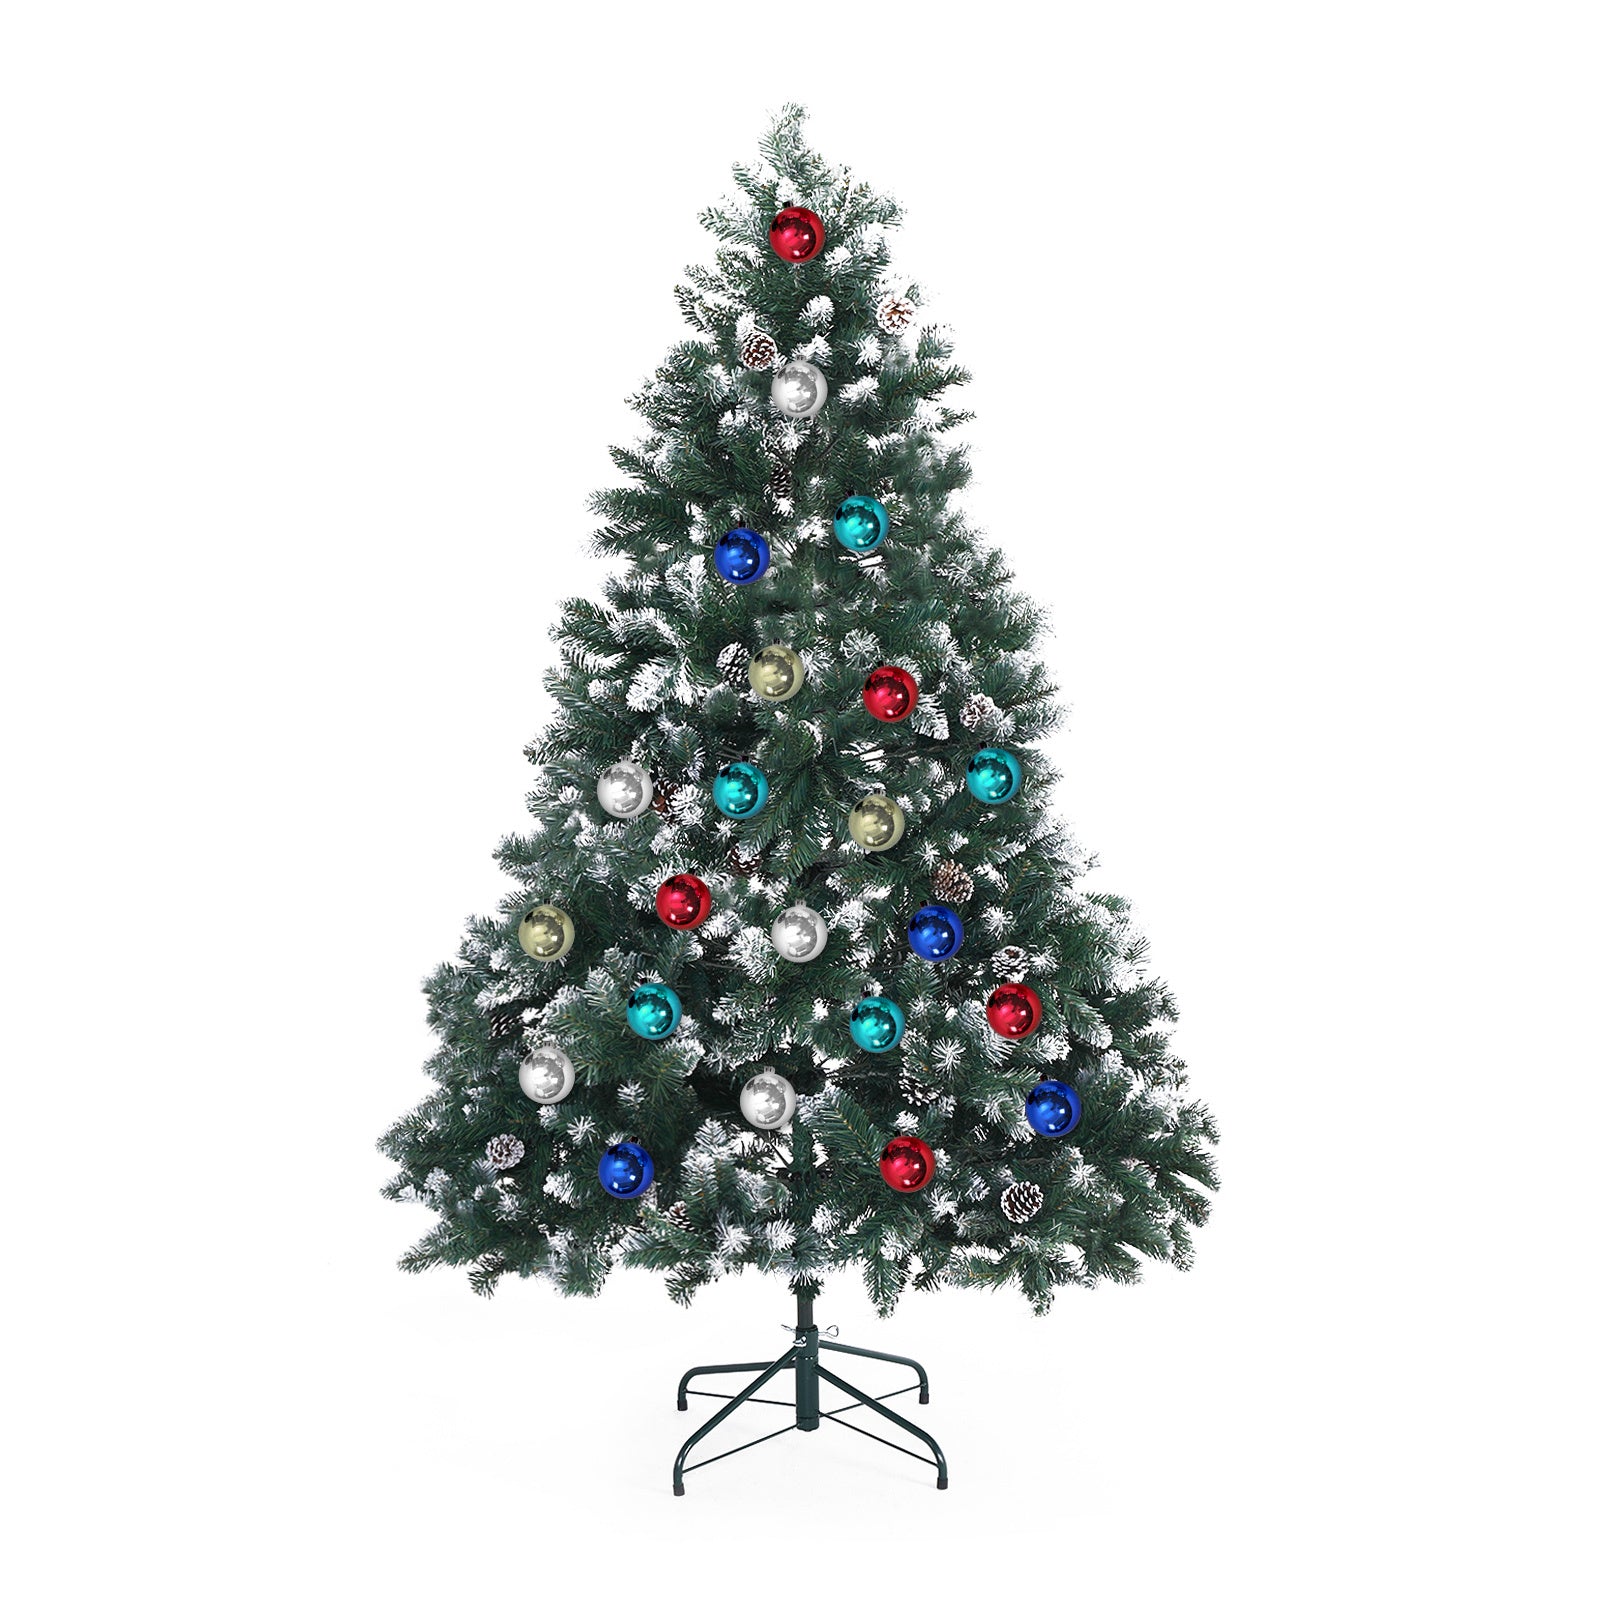 Home Ready 6Ft 180cm 930 tips Green Snowy Christmas Tree Xmas Pine Cones + Bauble Balls Deals499